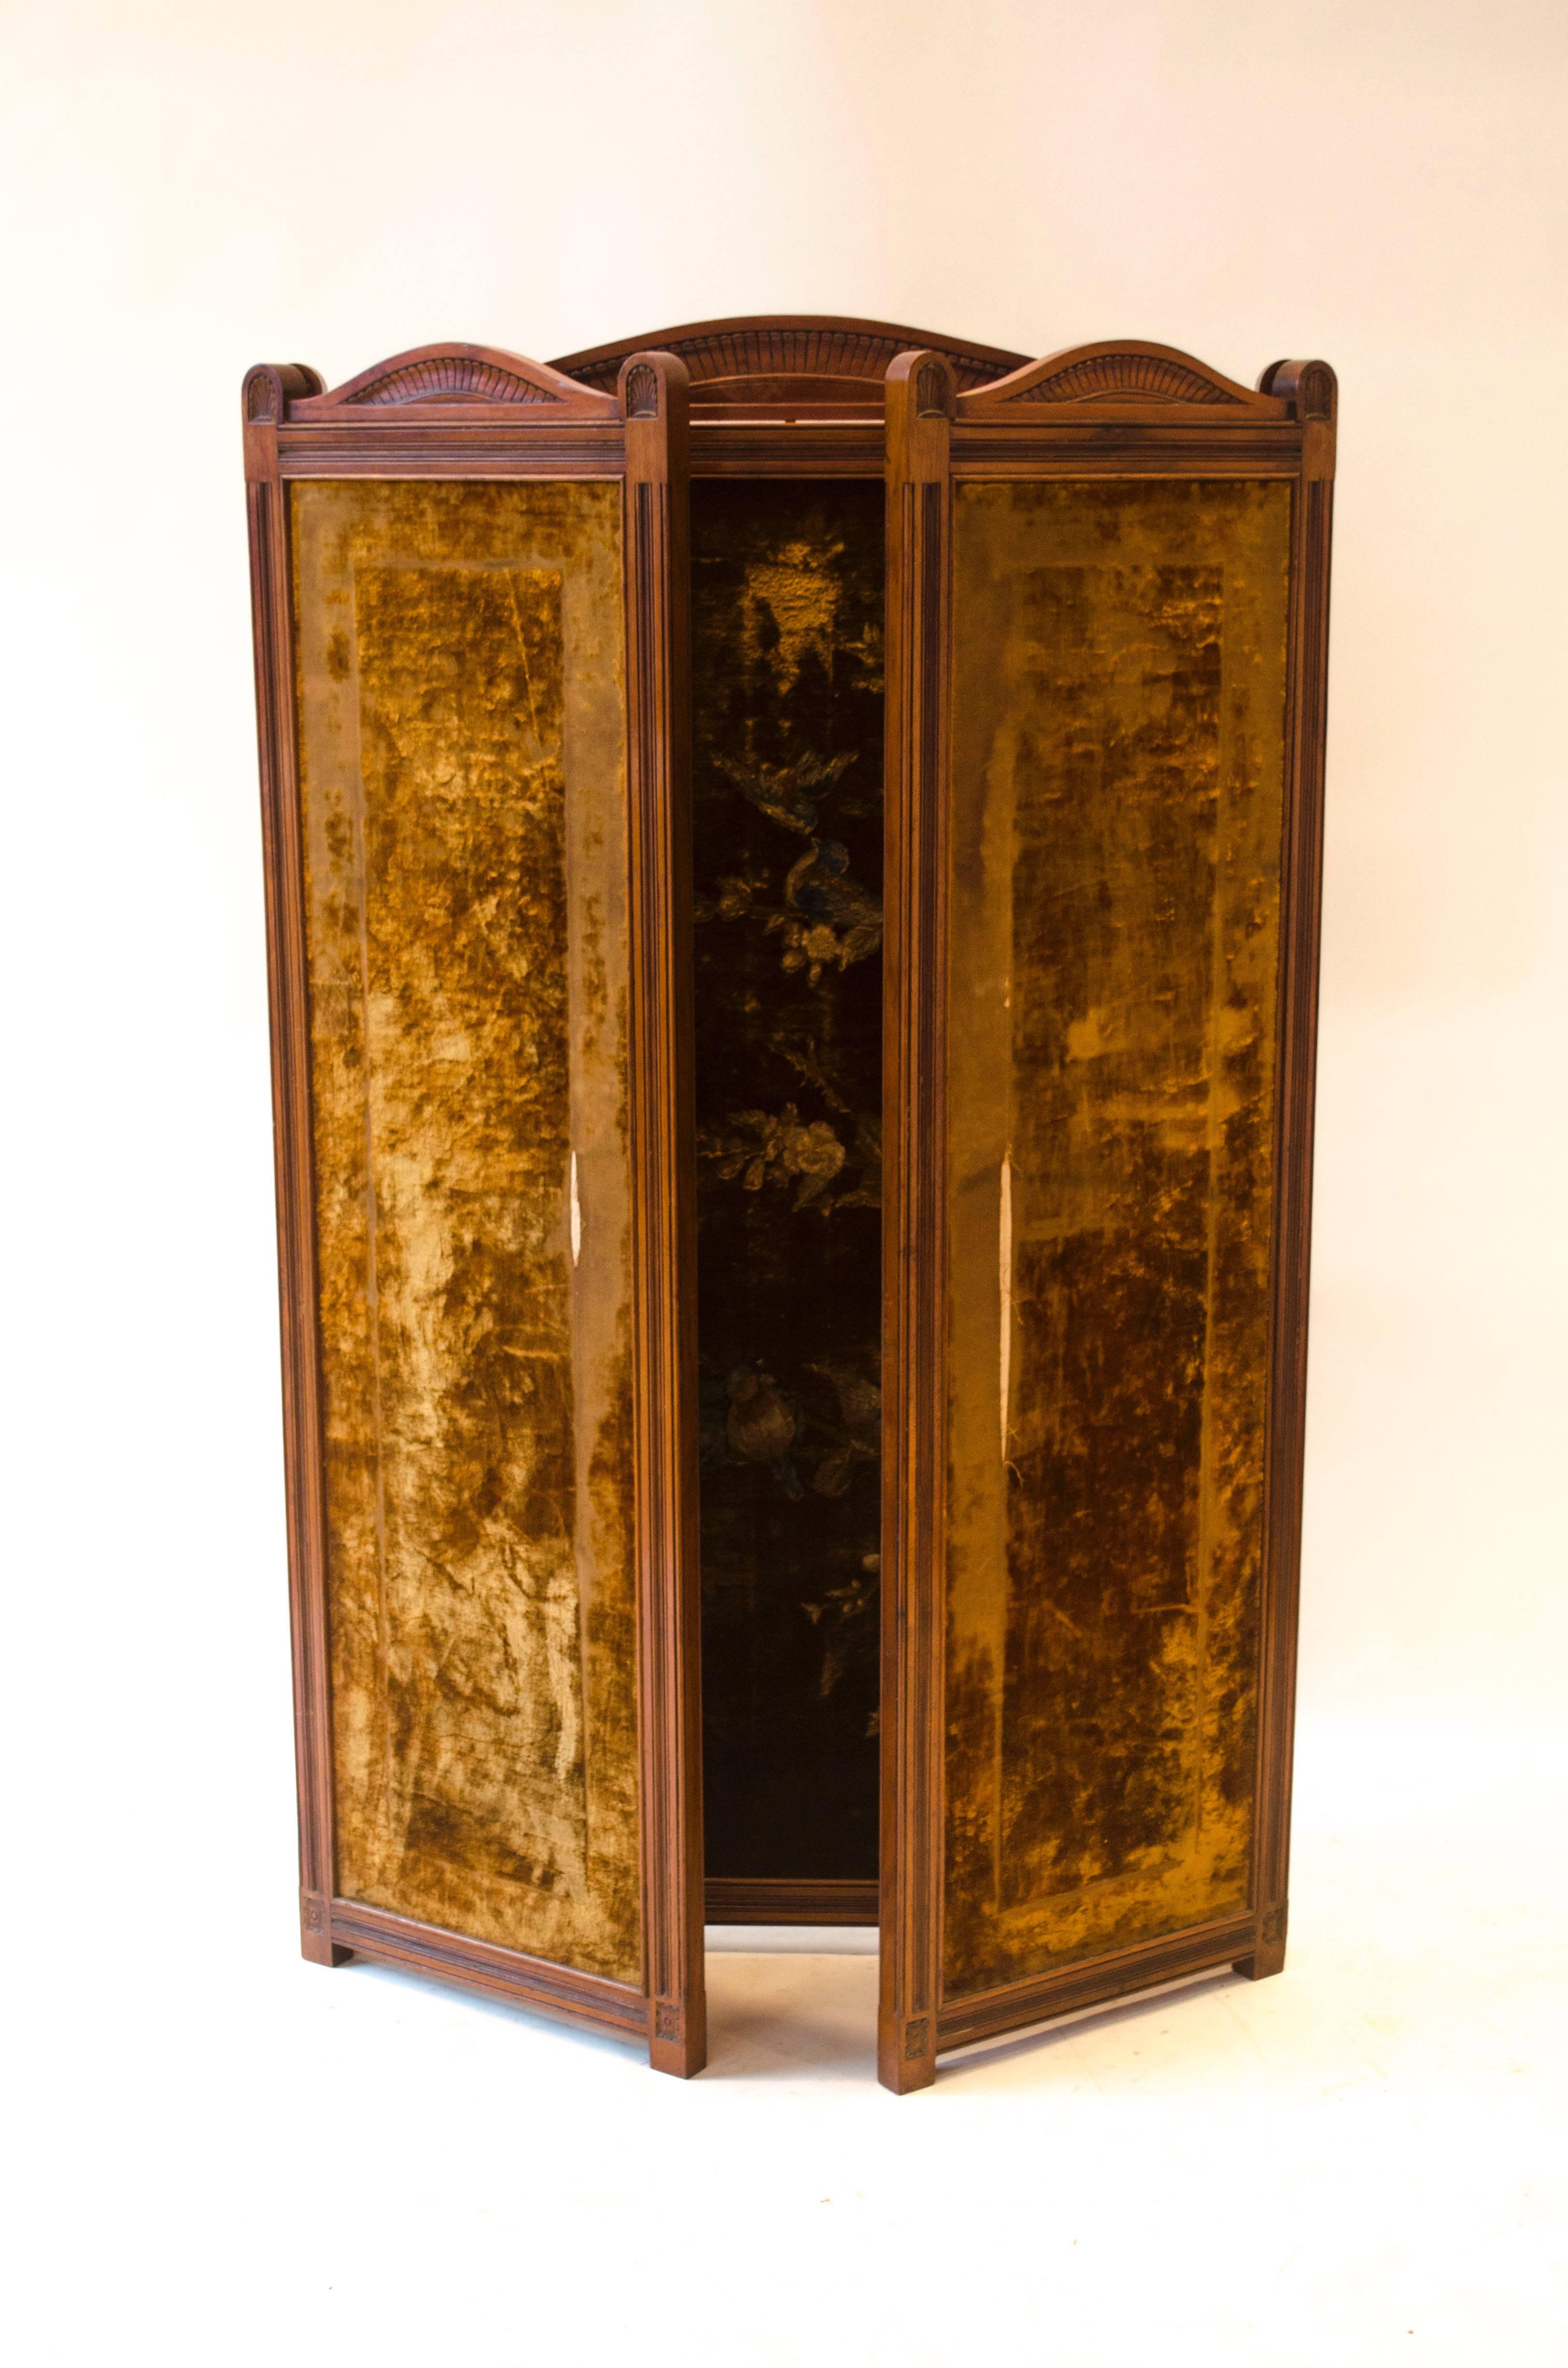 Bruce Talbert in the style of and probably made by Gillows. 
An Aesthetic Movement Walnut three-fold screen with carved serpentine and palm leaf decoration to the tops and tramline detail to the frames and six carved florets to the bottom of each